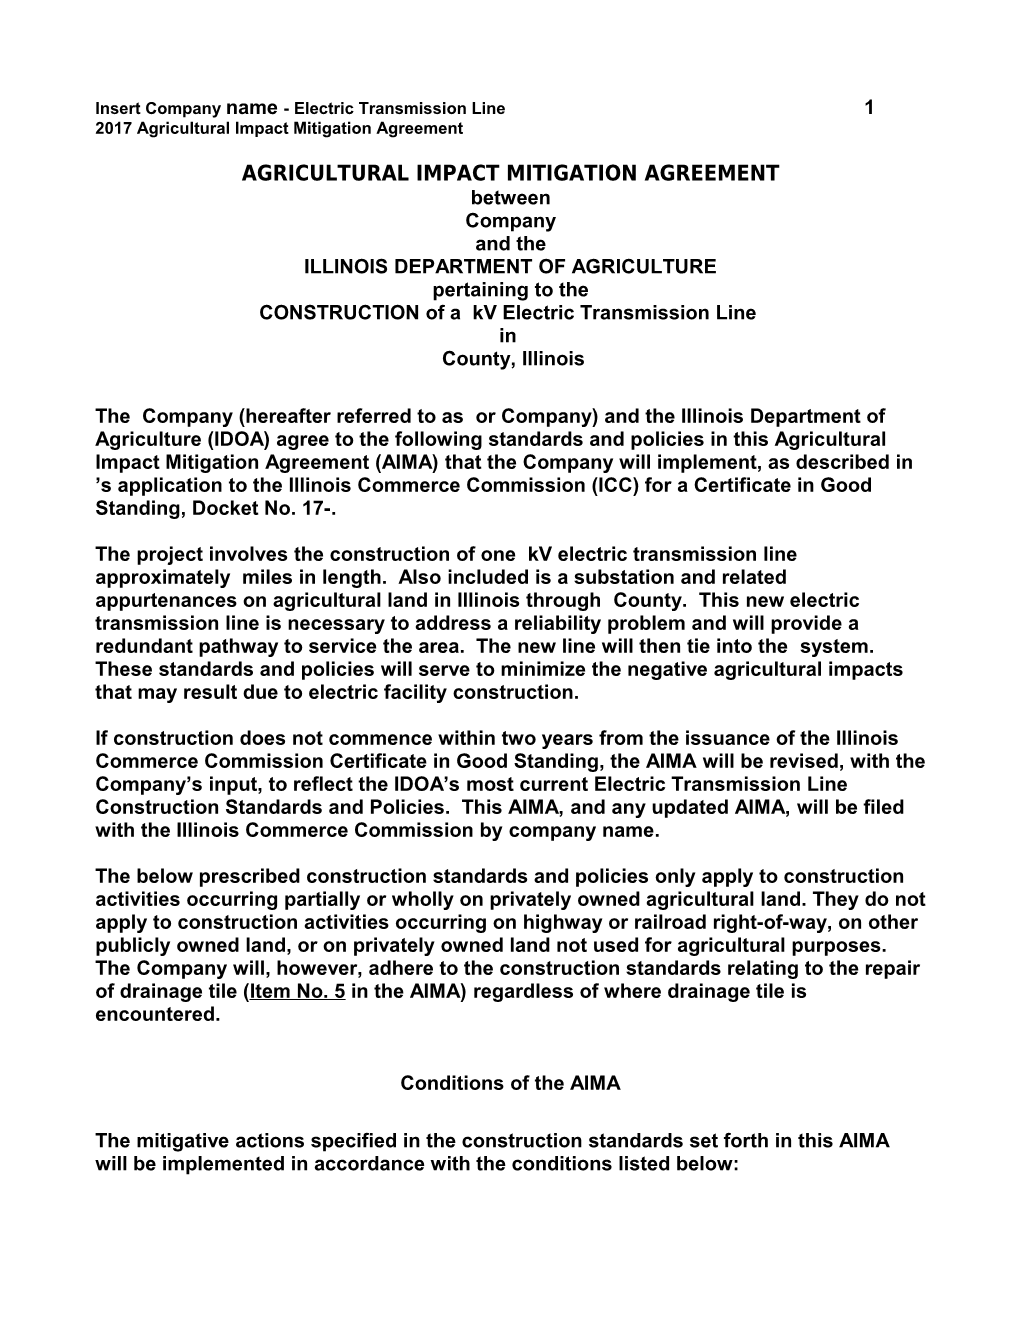 Agricultural Impact Mitigation Agreement